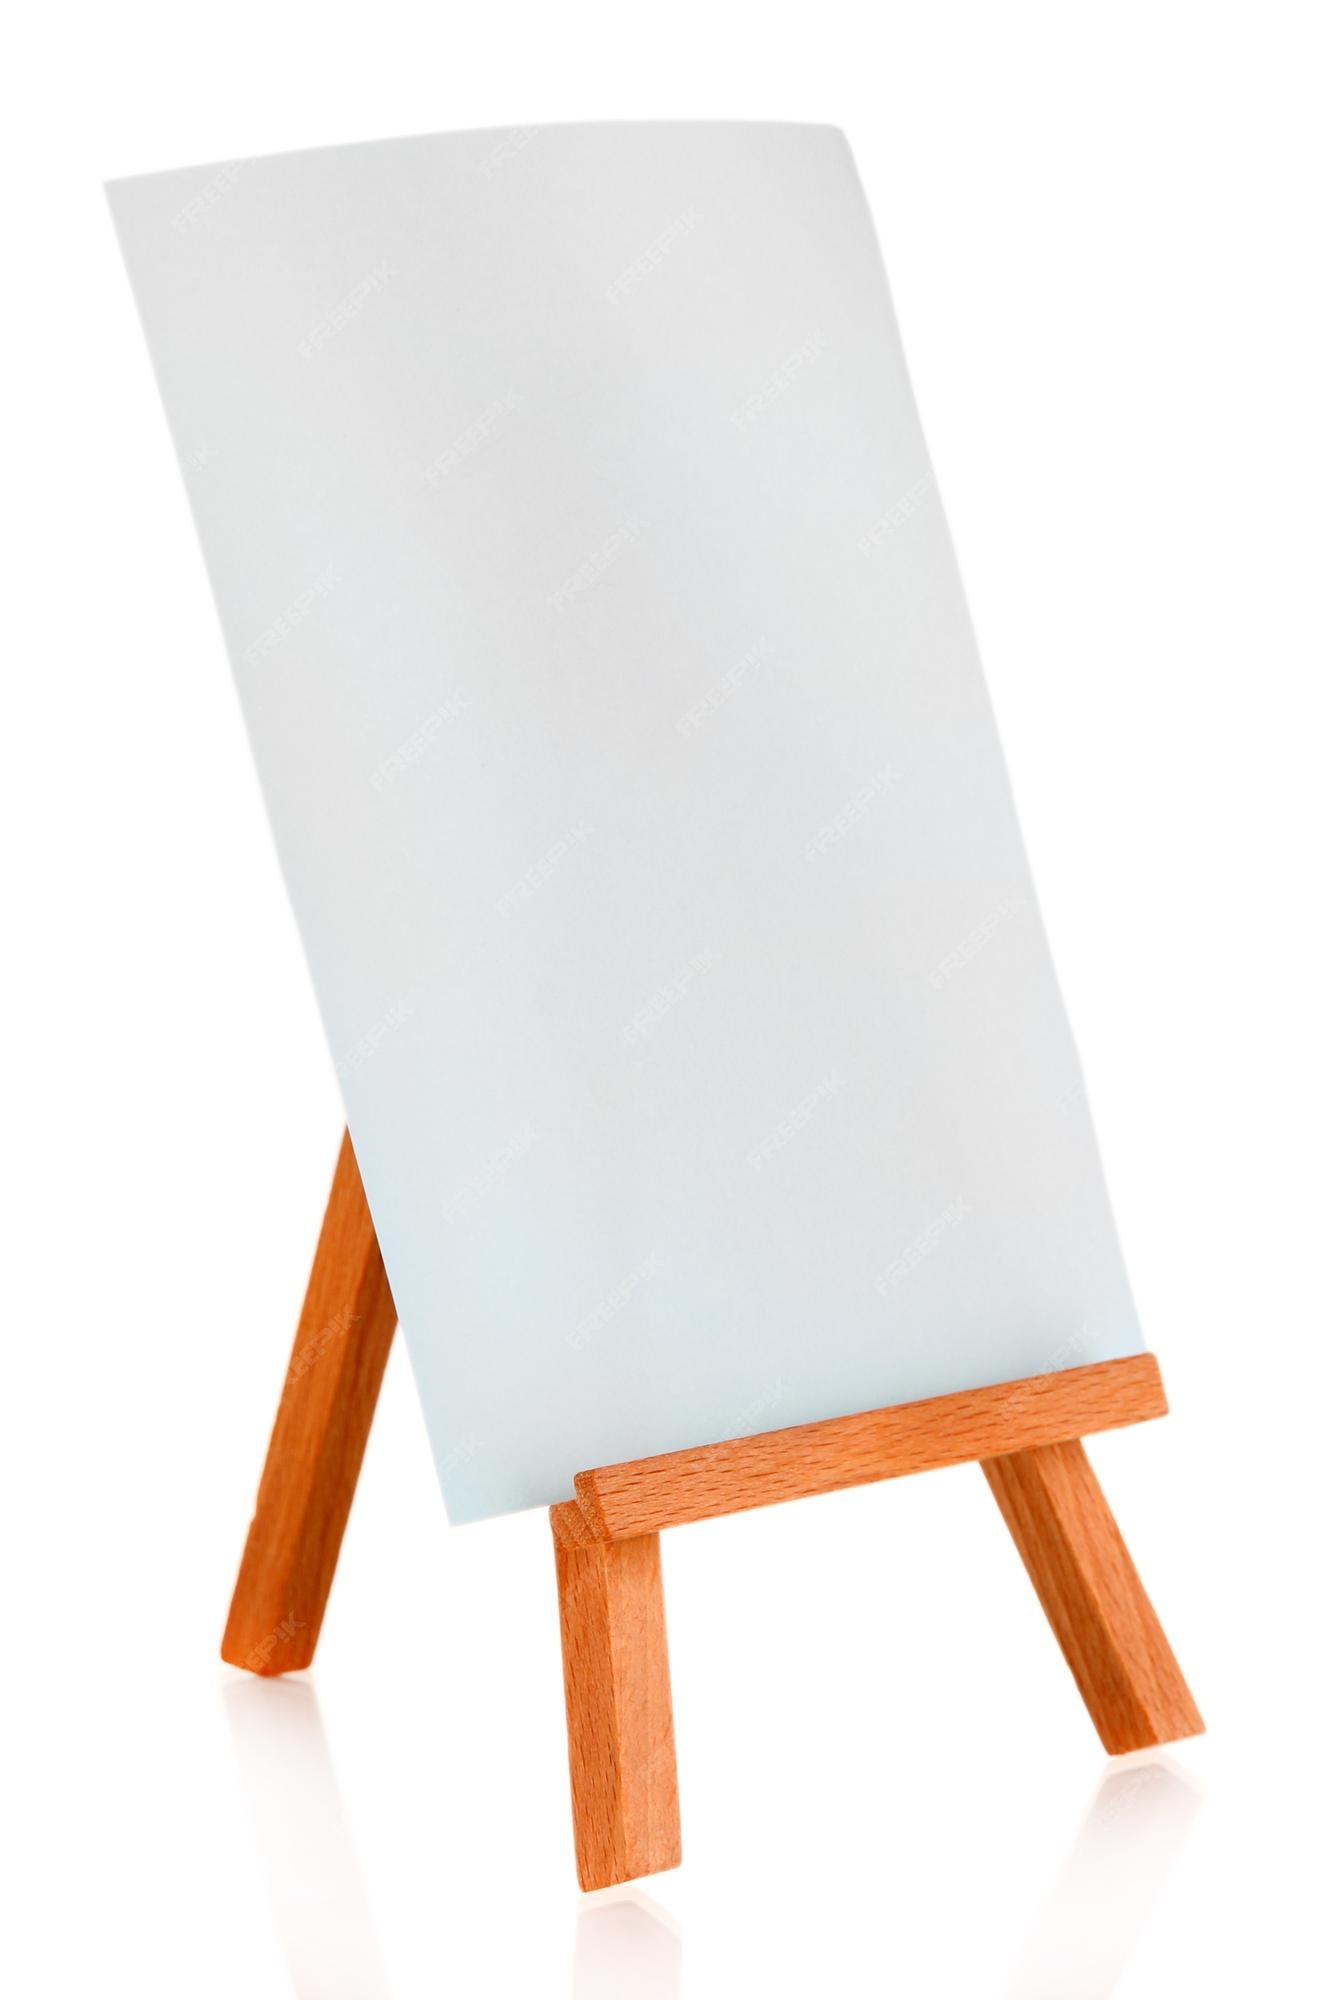 Premium Photo  Small easel with sheet of paper isolated on white